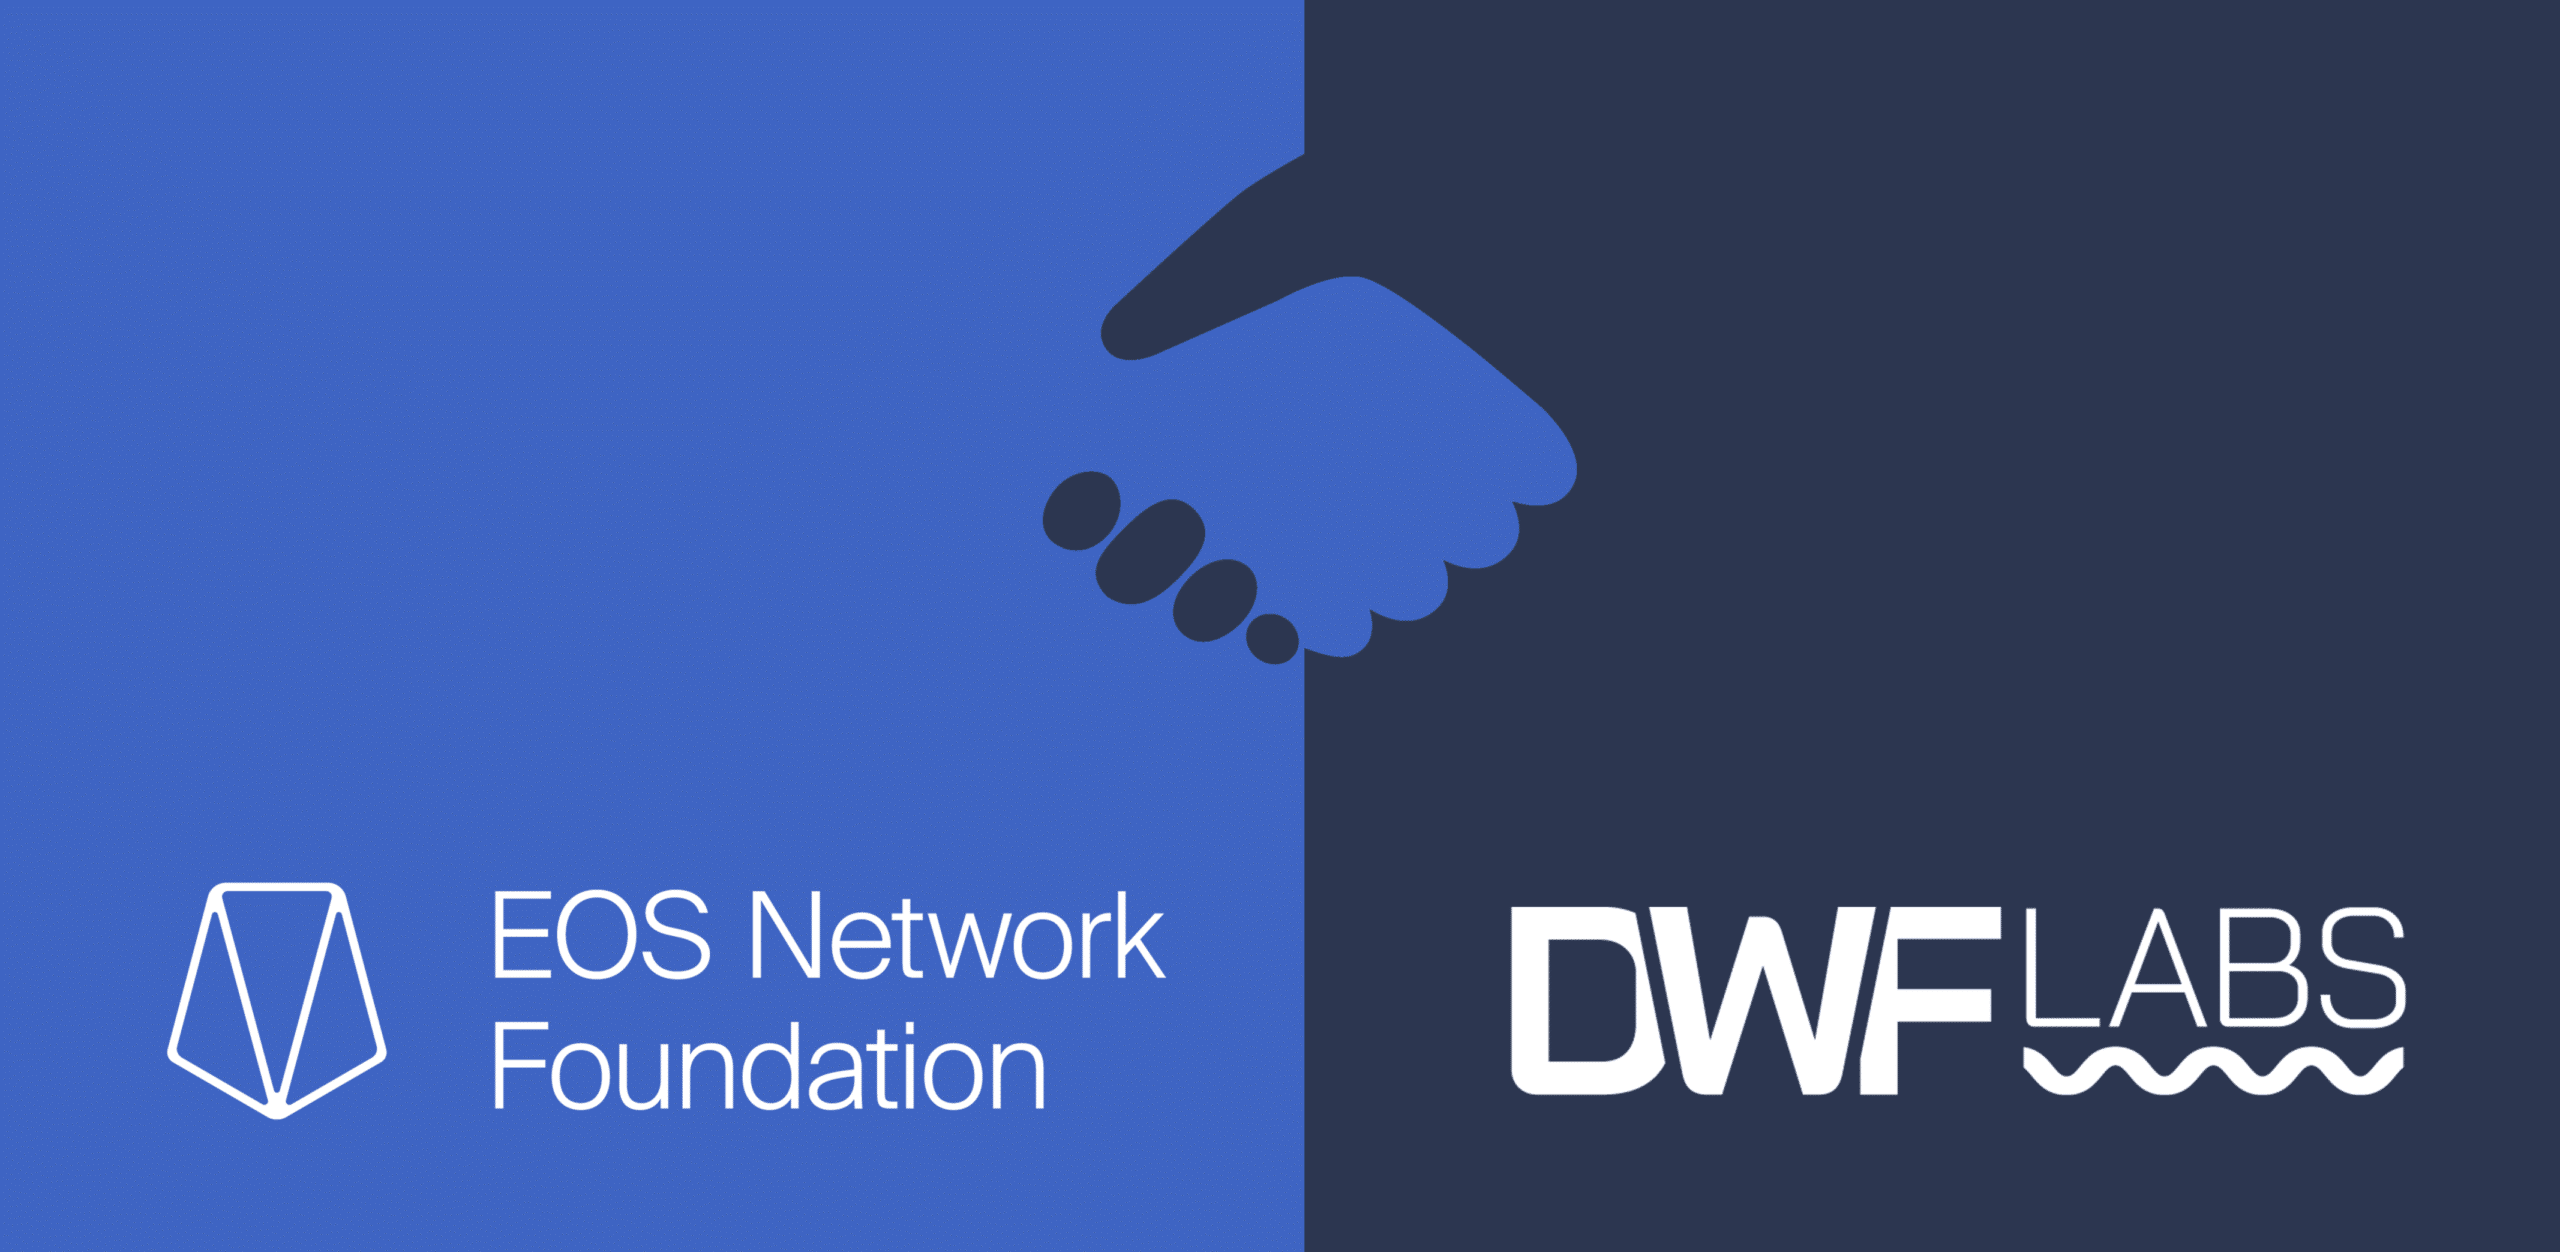 DWF Labs Announces $60M Strategic Partnership with EOS Network Foundation